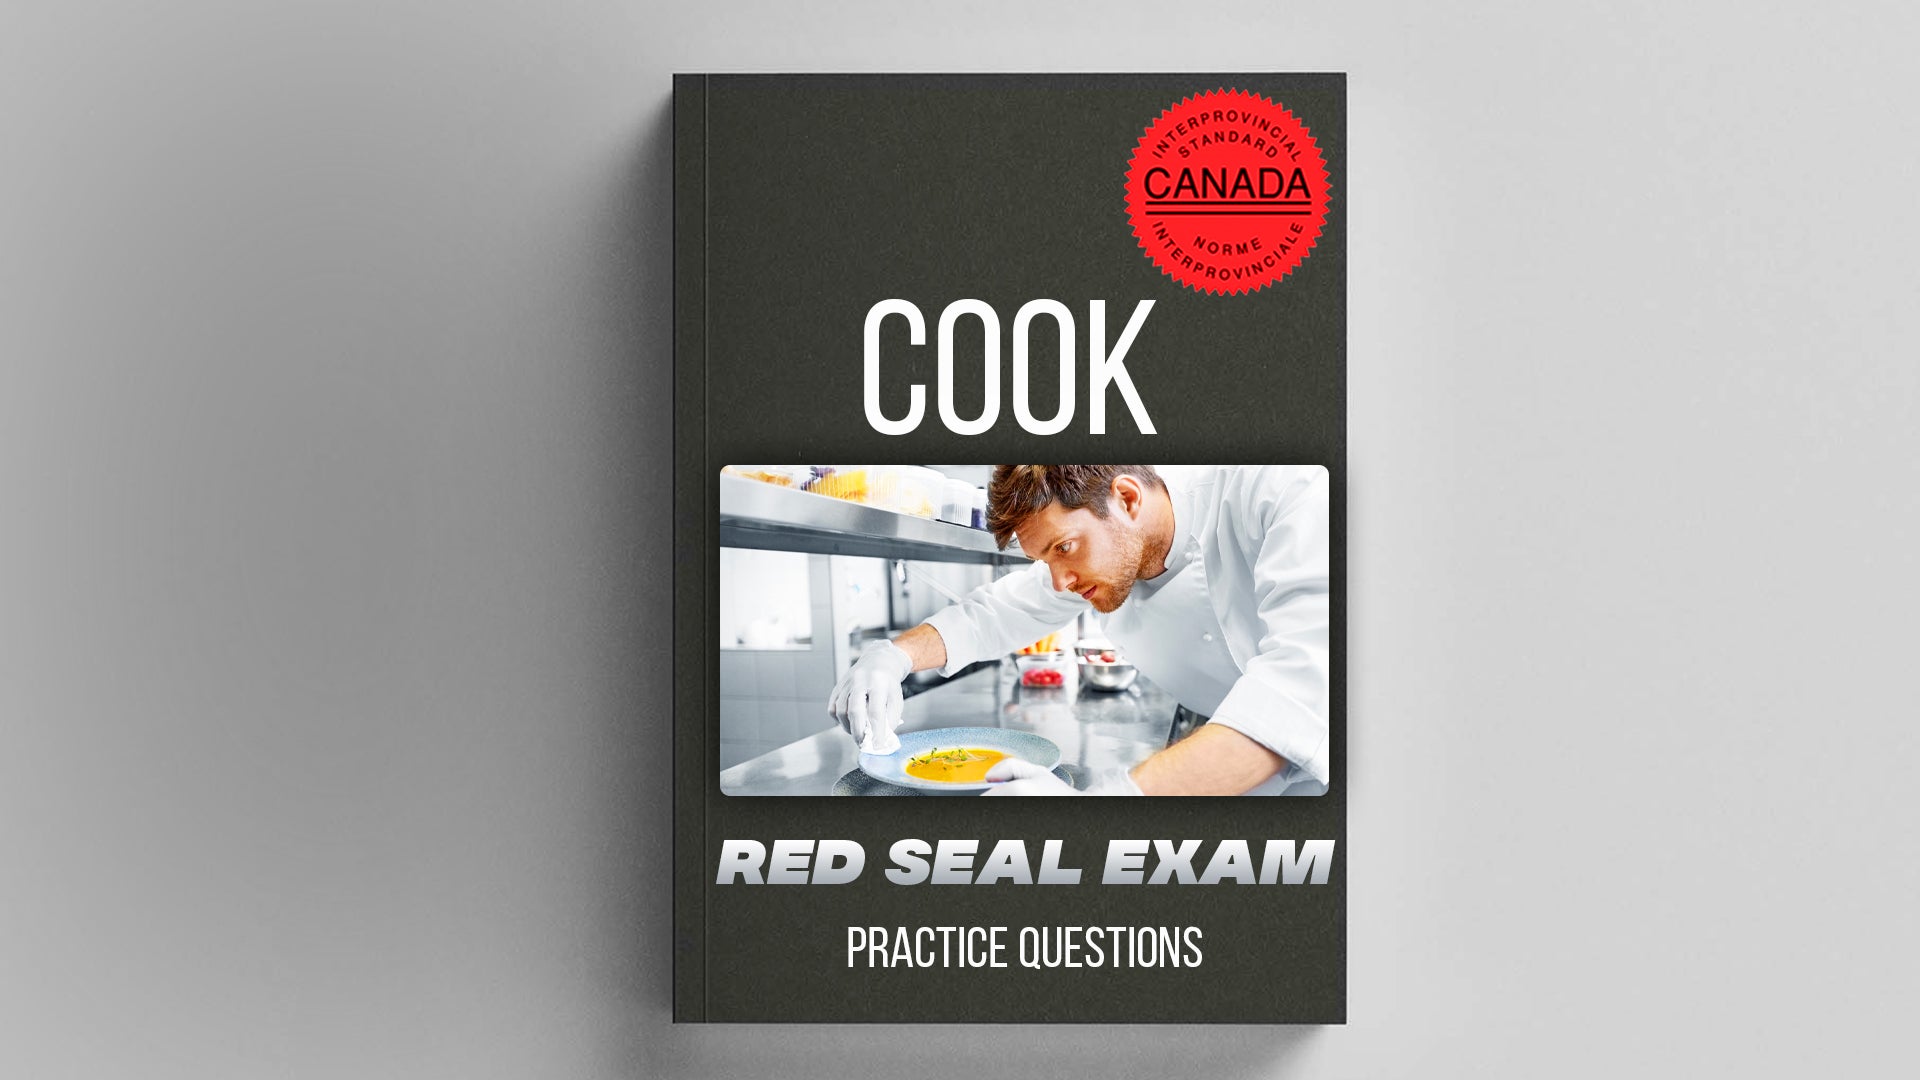 Cook Red Seal Exam Practice Questions